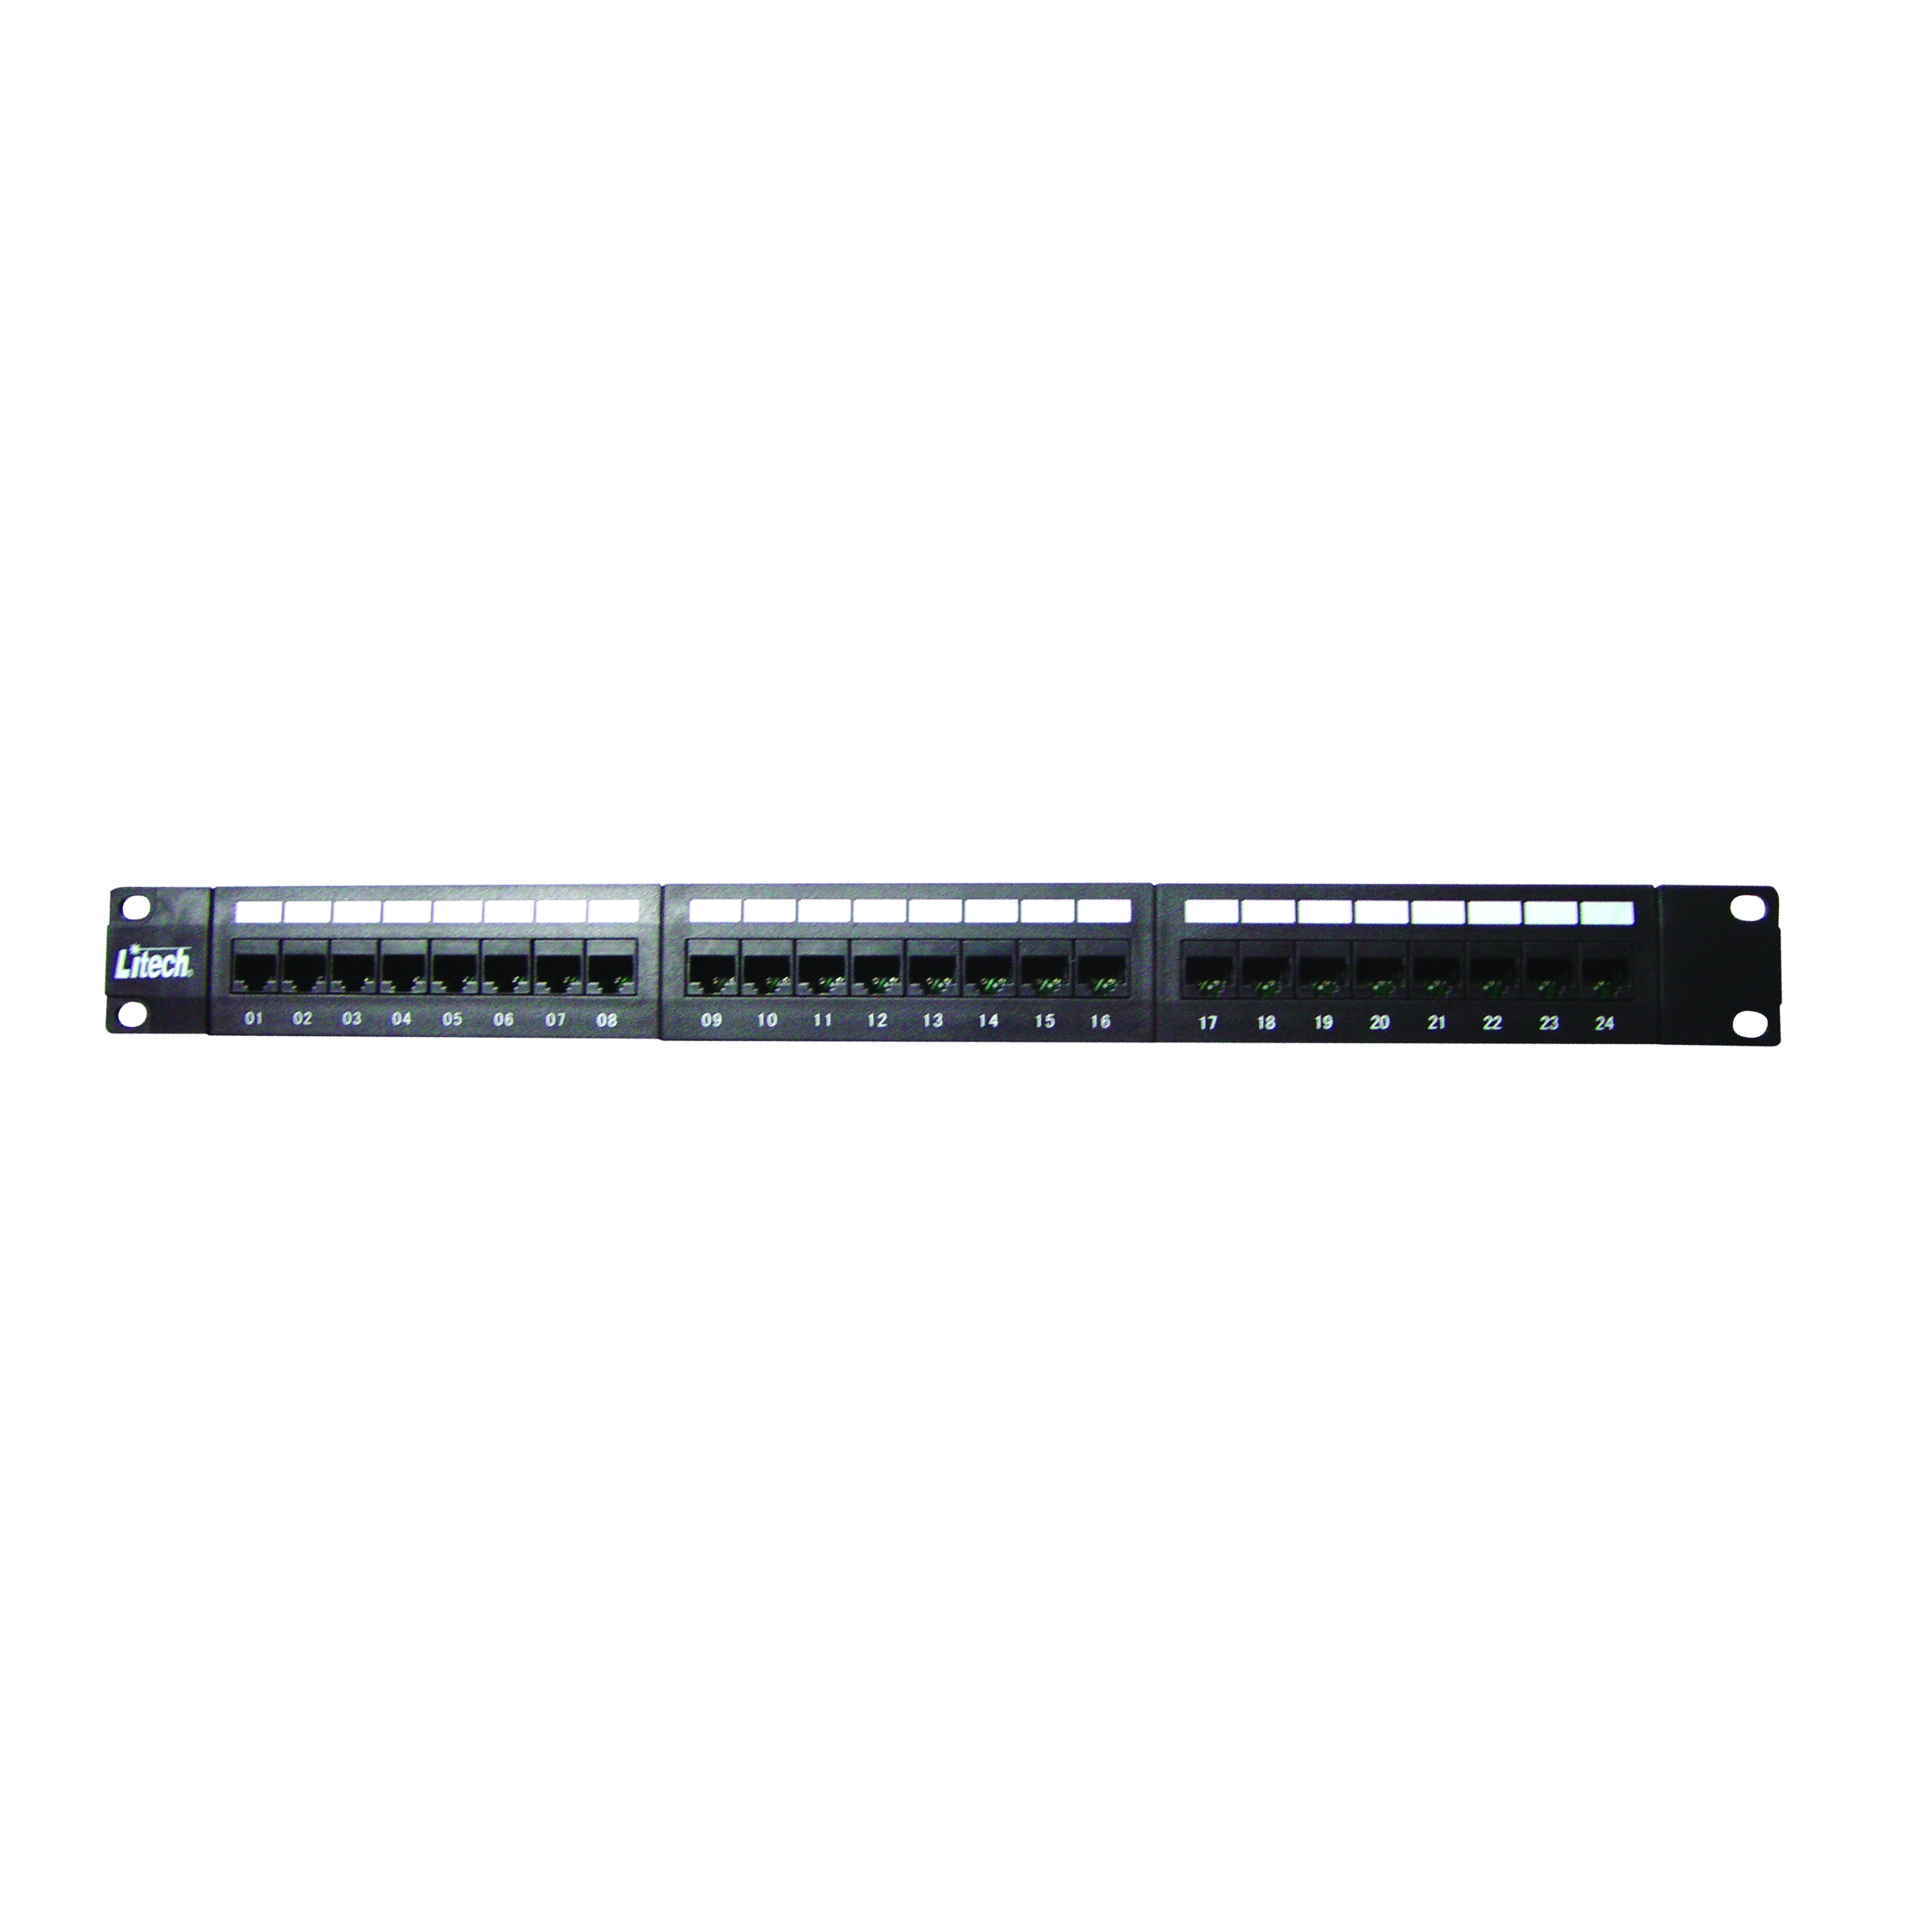 Structured Cabling_panel_INLINE Cat5e 24.jpg